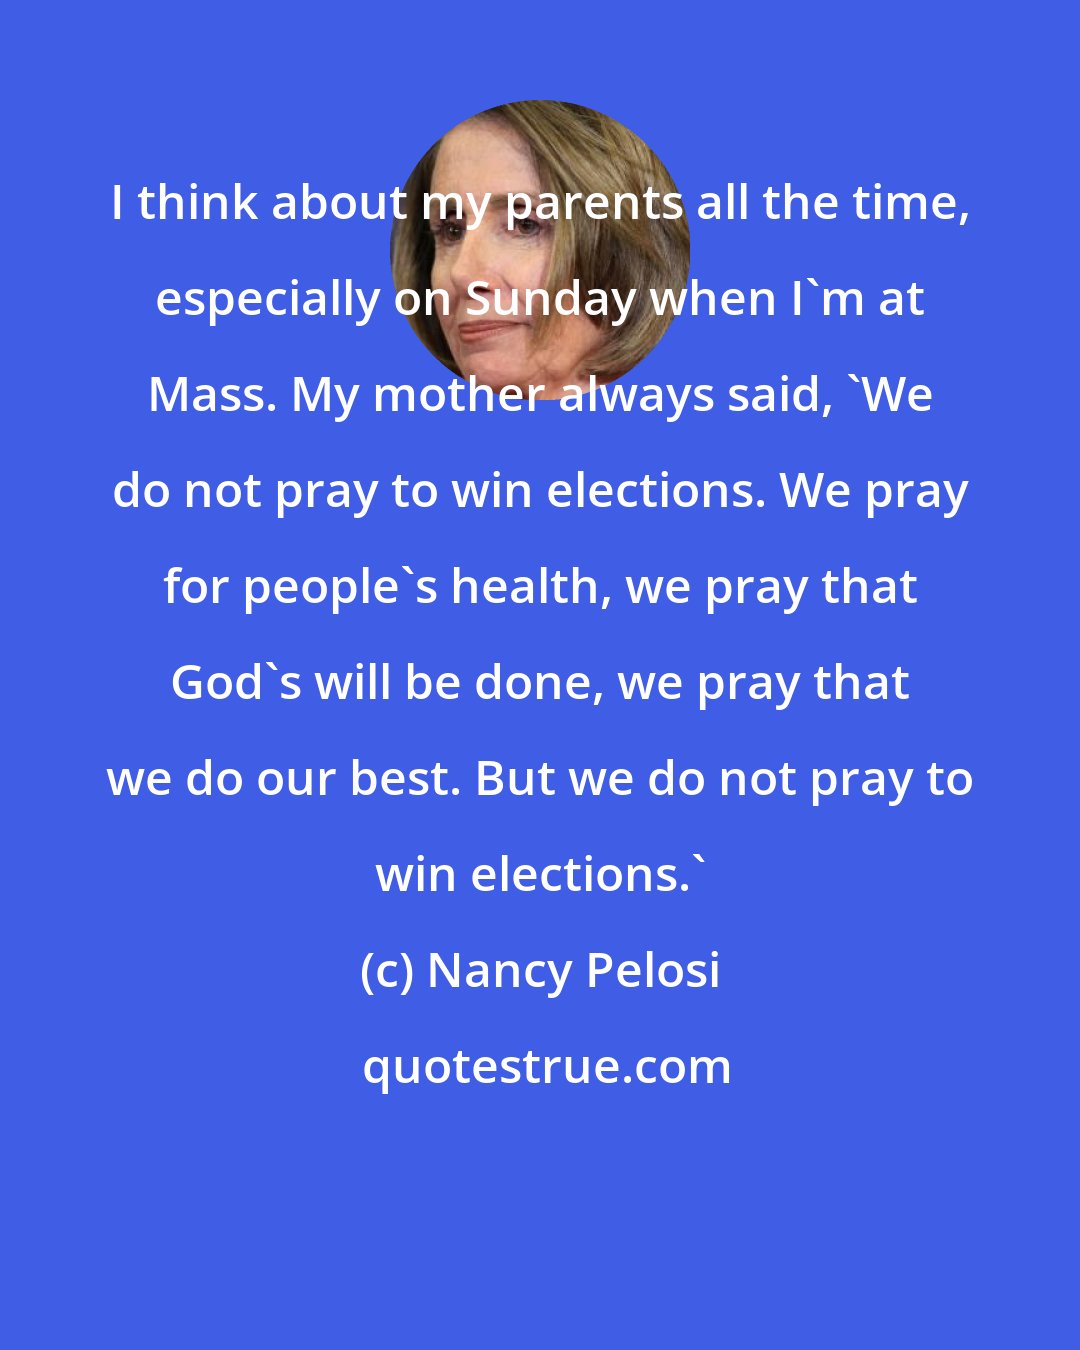 Nancy Pelosi: I think about my parents all the time, especially on Sunday when I'm at Mass. My mother always said, 'We do not pray to win elections. We pray for people's health, we pray that God's will be done, we pray that we do our best. But we do not pray to win elections.'